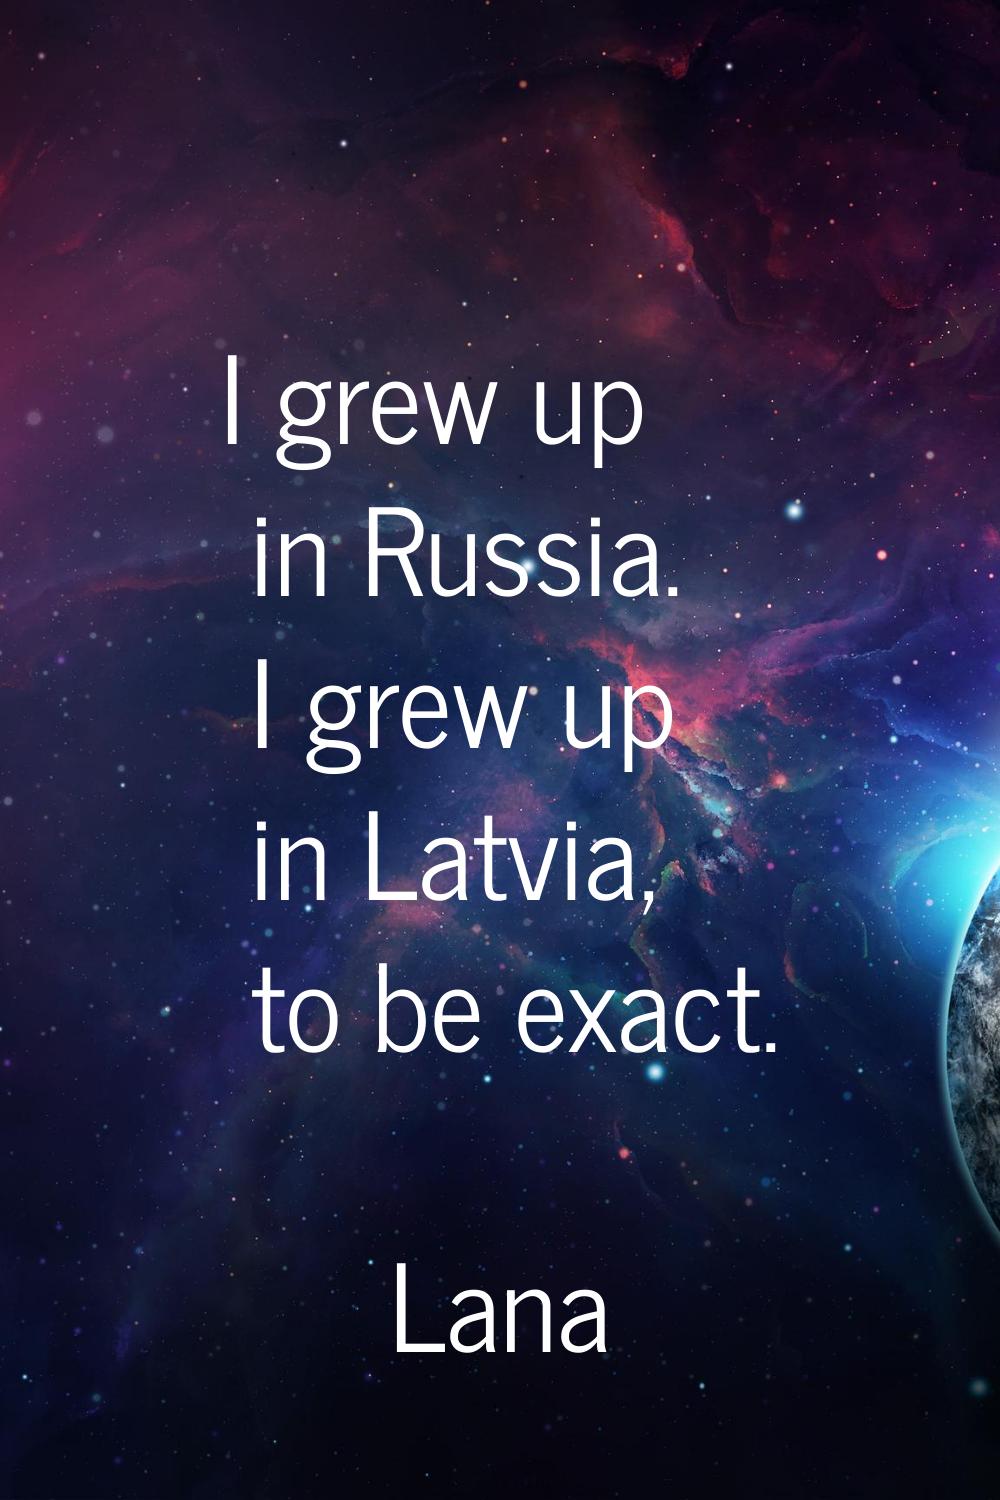 I grew up in Russia. I grew up in Latvia, to be exact.